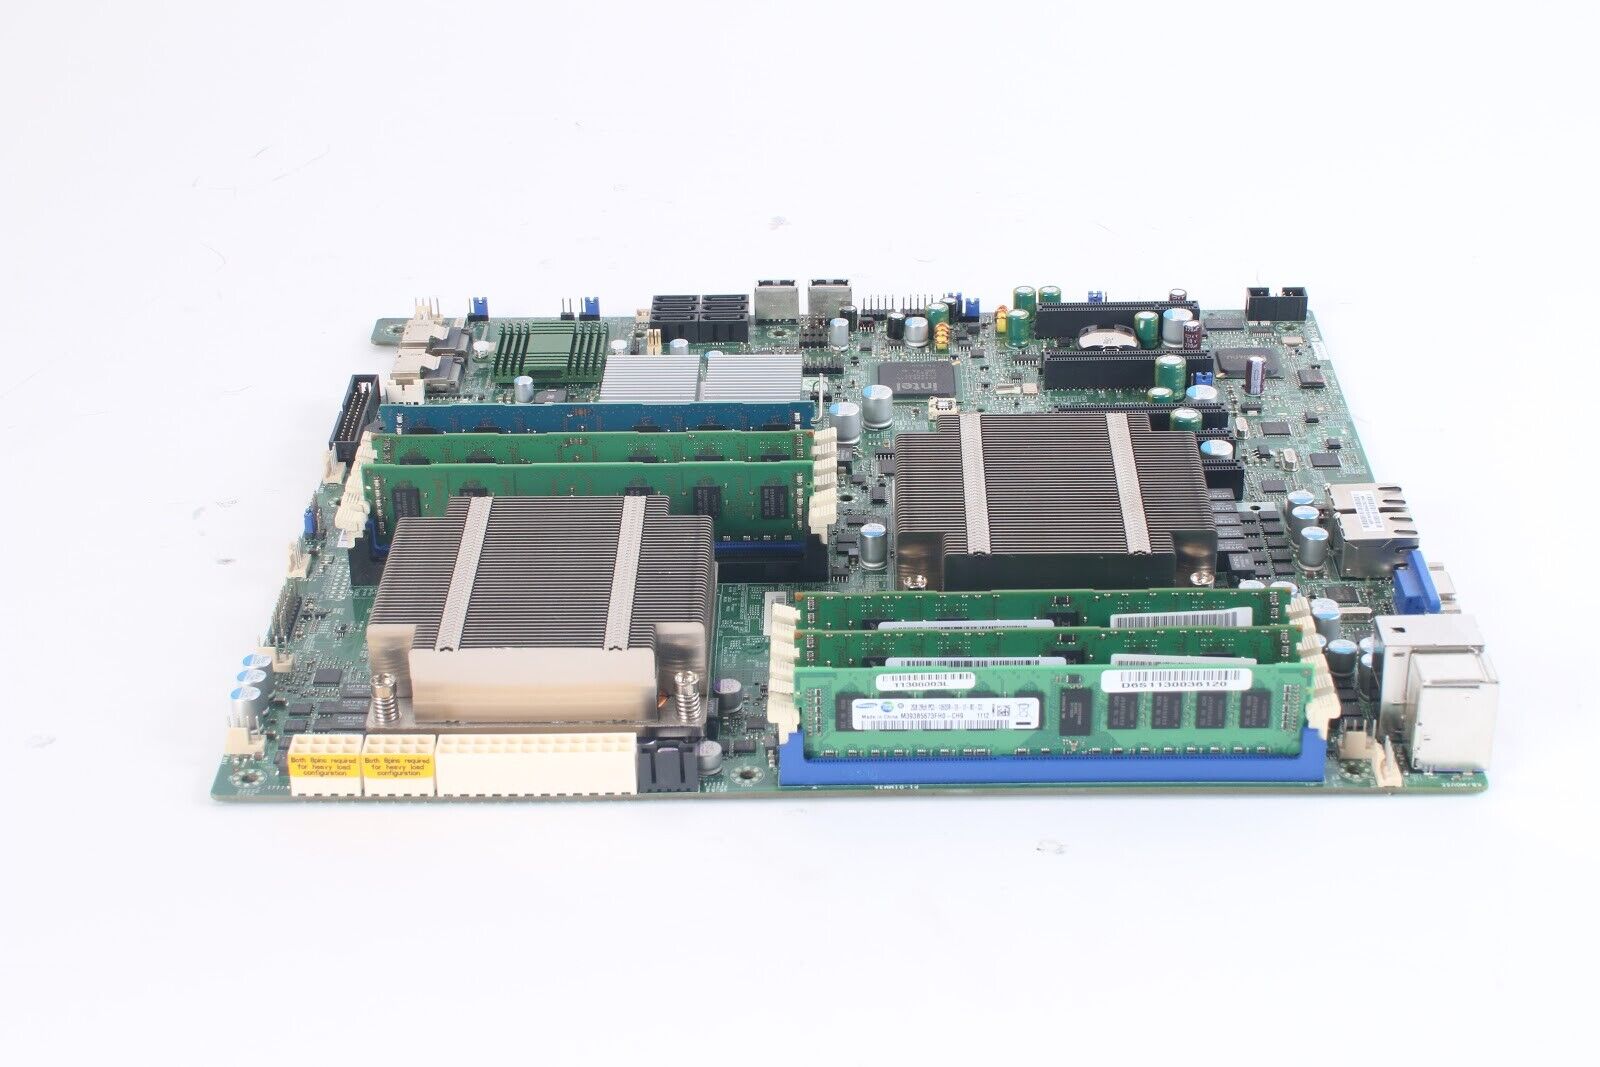 SuperMicro X8DT6-a-IS018 Motherboard 2x Intel Xeon E5603 1.60GHz 6x 2GB PC310600